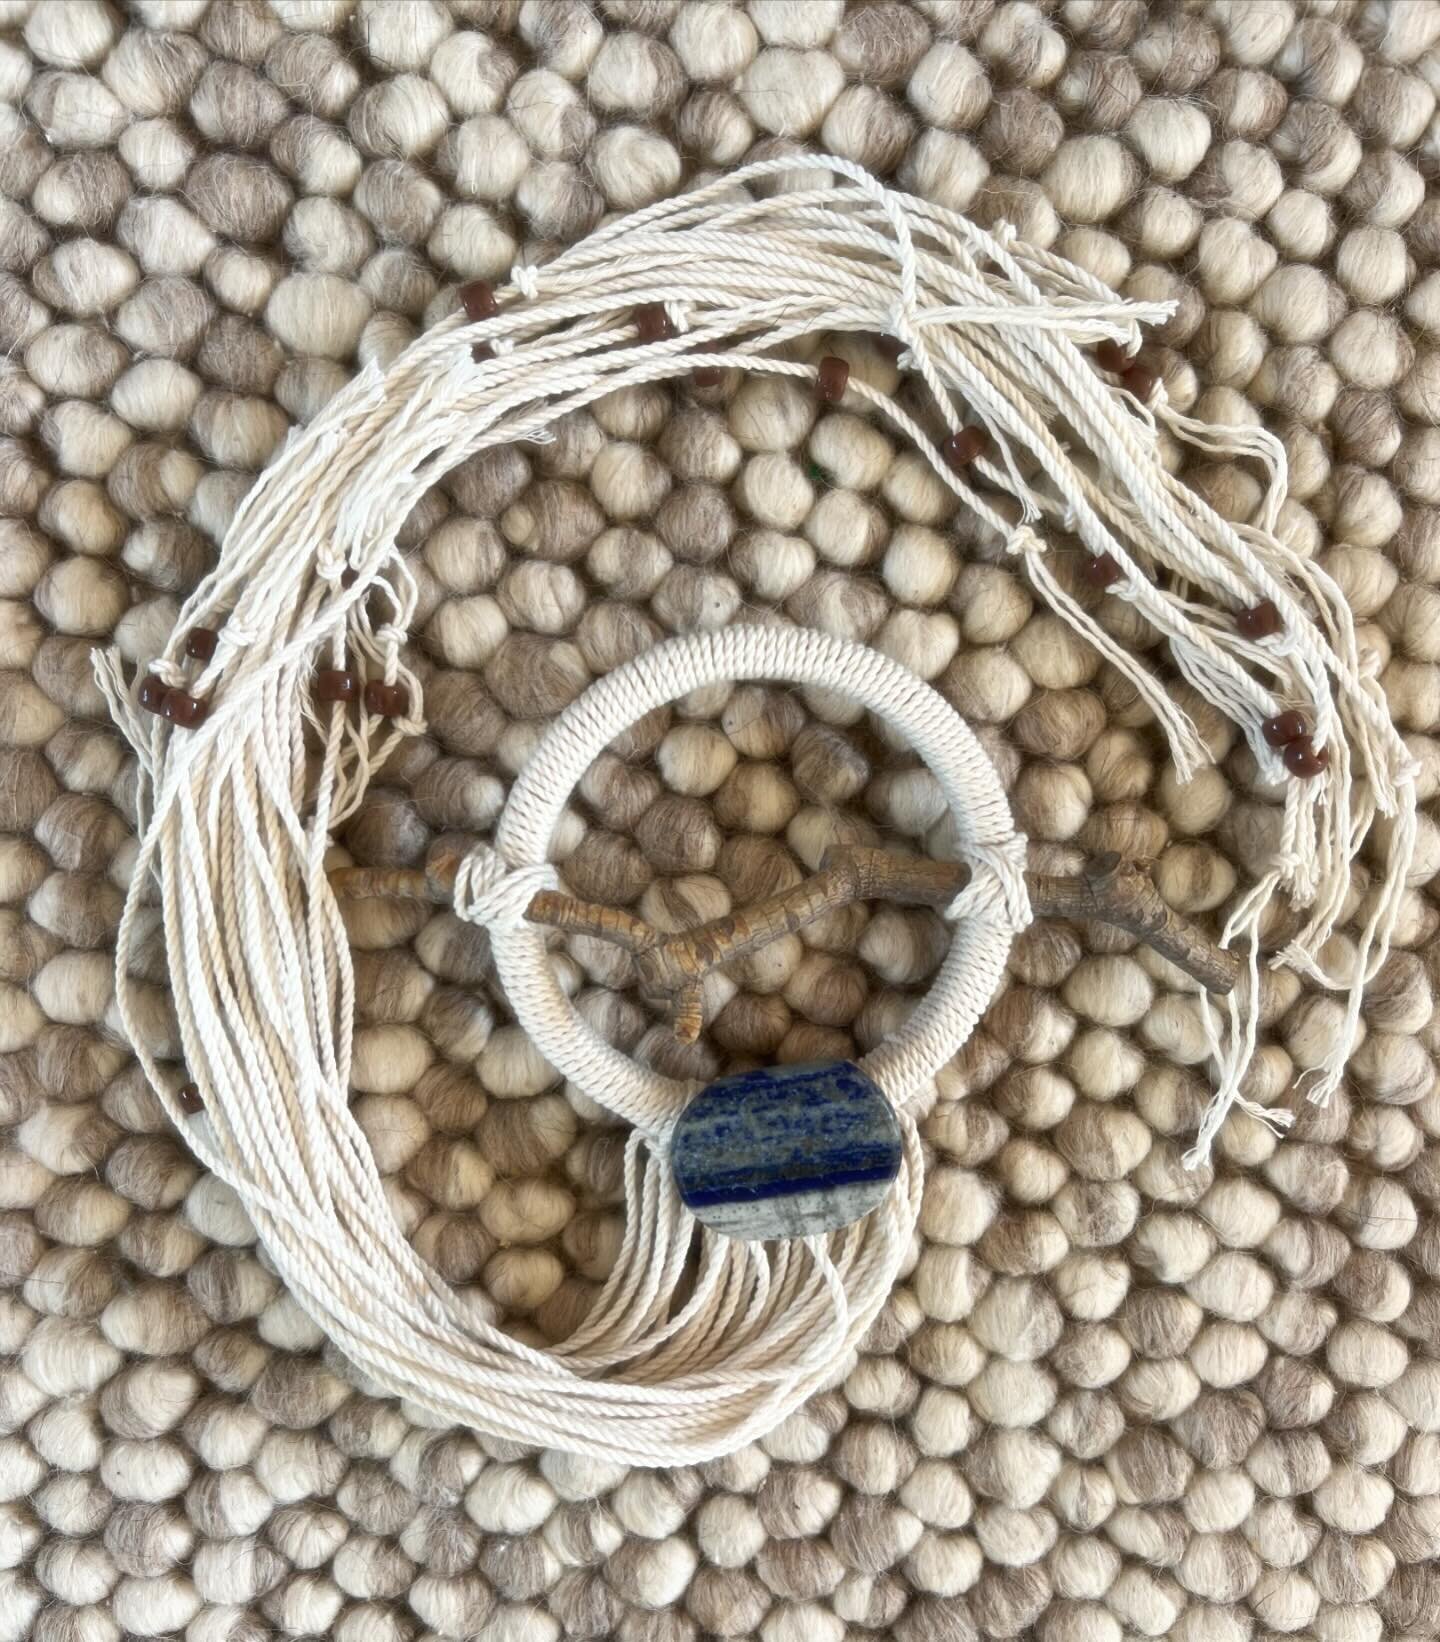 POPPY on rug. 

X-Small (4&rdquo; diameter) wall hanging in off-white rope, with grey/brown beads.

Stones: Lapis Lazuli

Meaning: Lapis Lazuli is the symbol of royalty and honor, gods and power, spirit and vision. It is a powerful crystal for activa